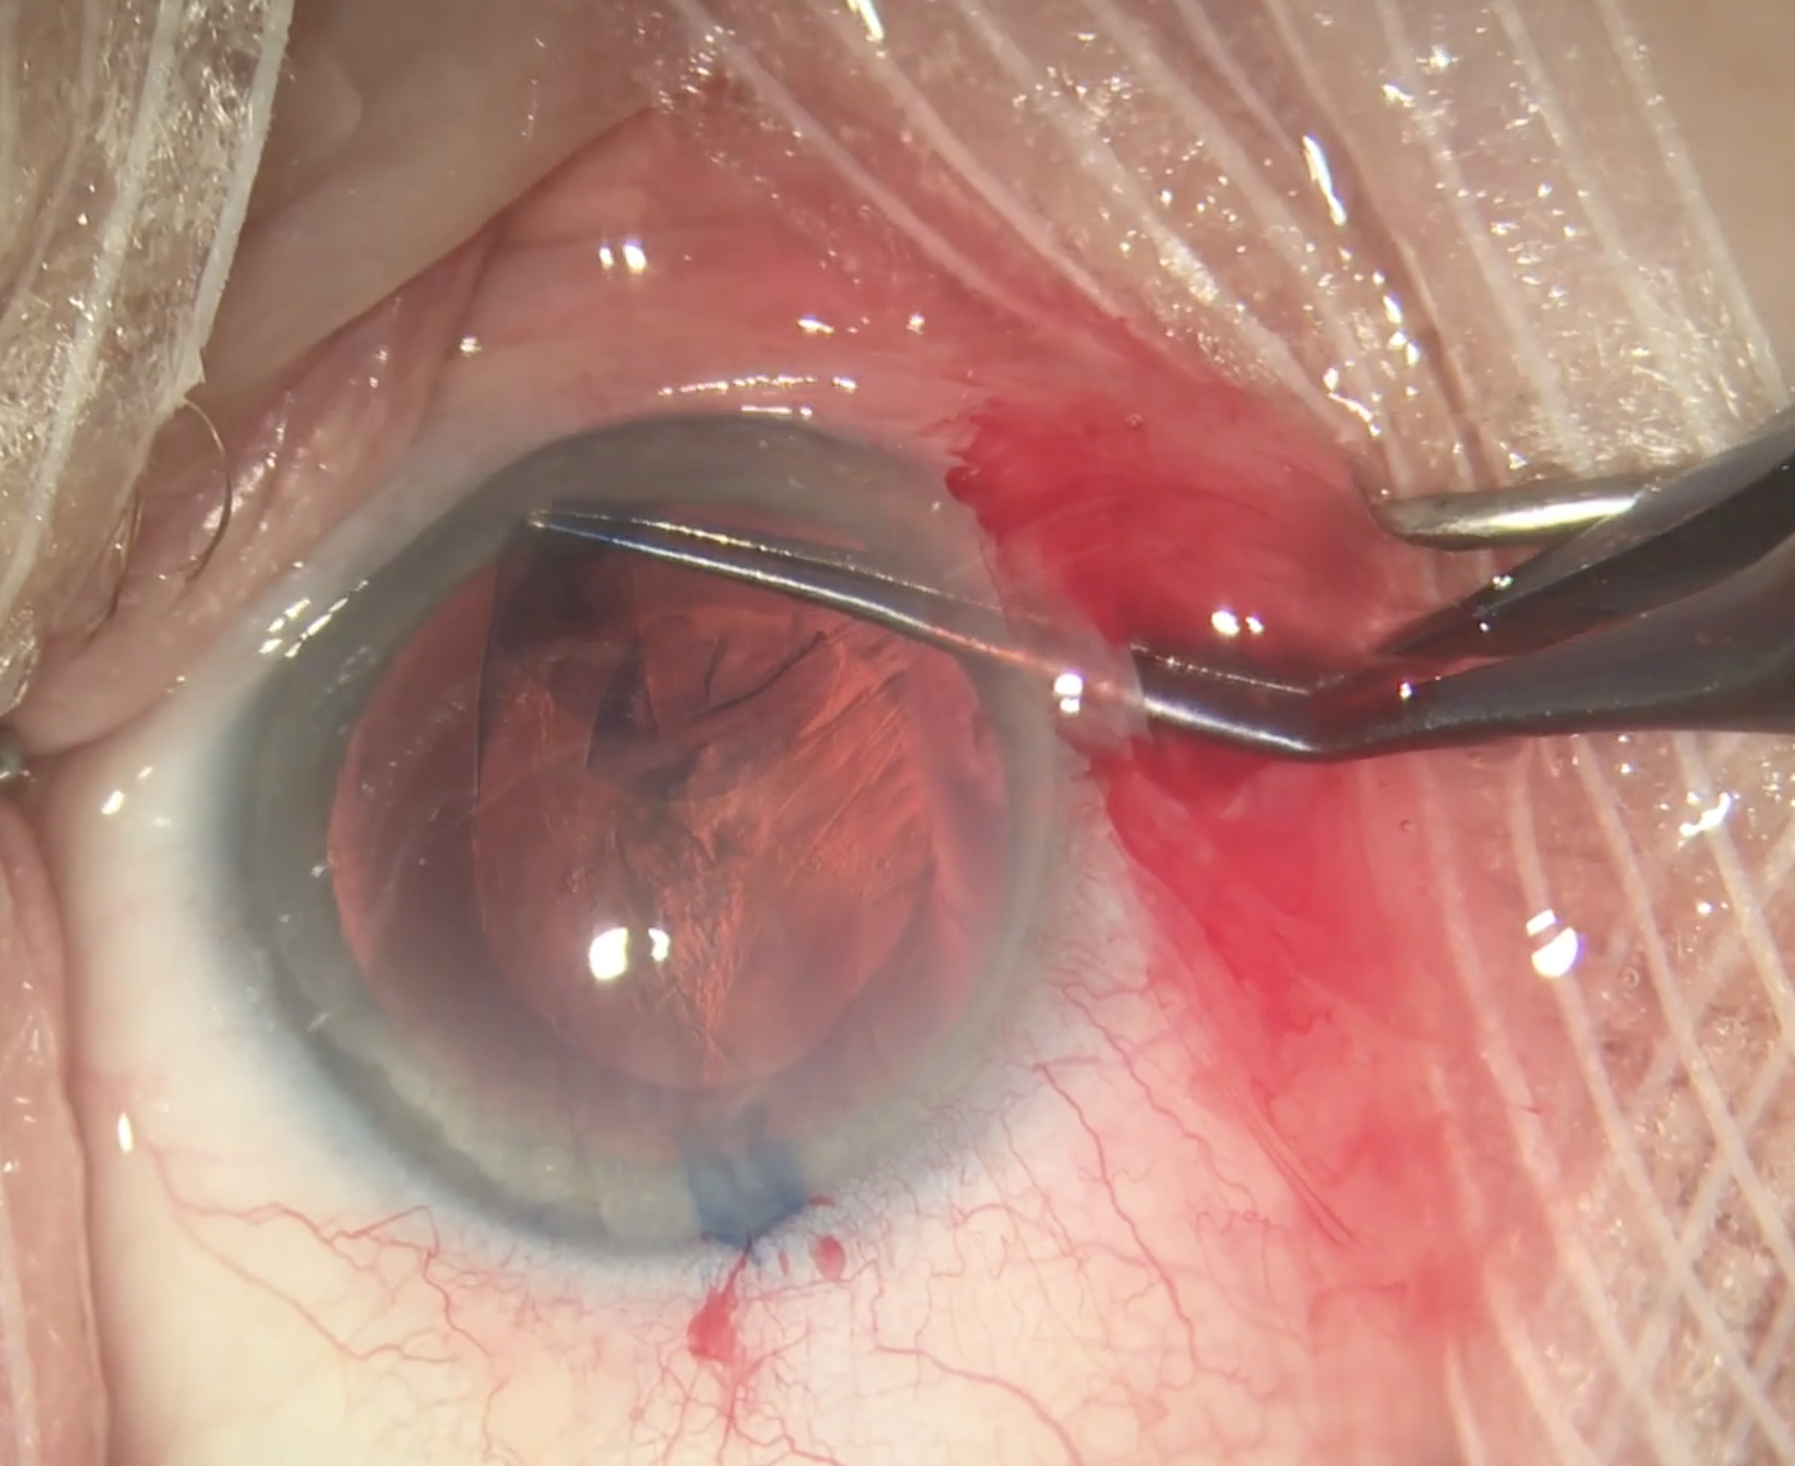 Only 1.9% of anticipated ISBCS patients opted out of second-eye operation, which bodes well for this procedure’s increased efficiency in the event it becomes possible to adopt here.